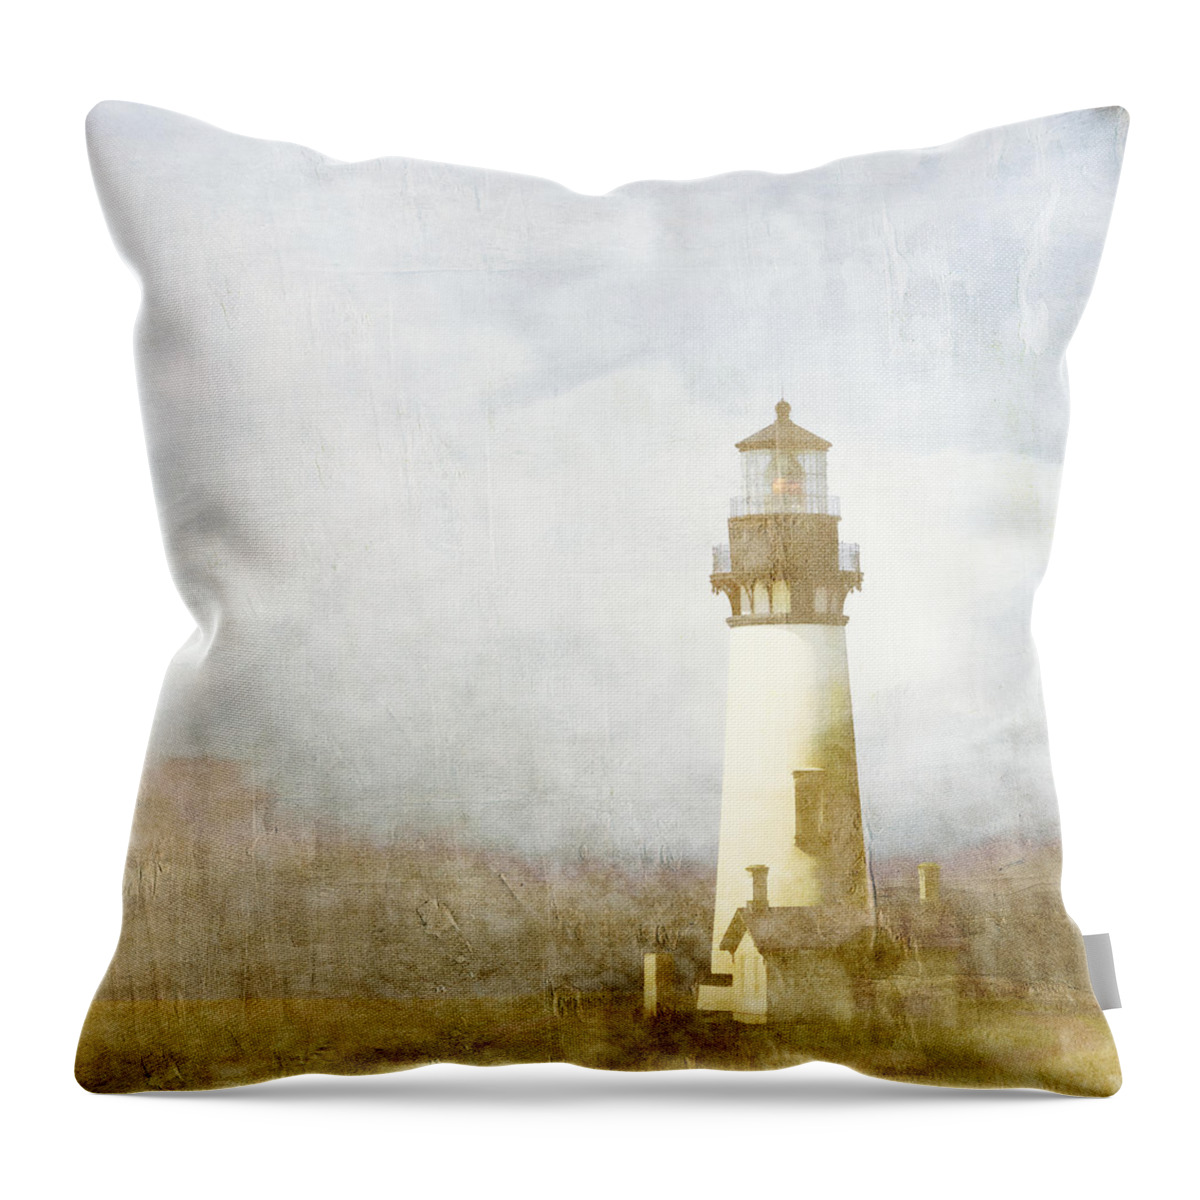 Yaquina Throw Pillow featuring the photograph Yaquina Head Light by Carol Leigh